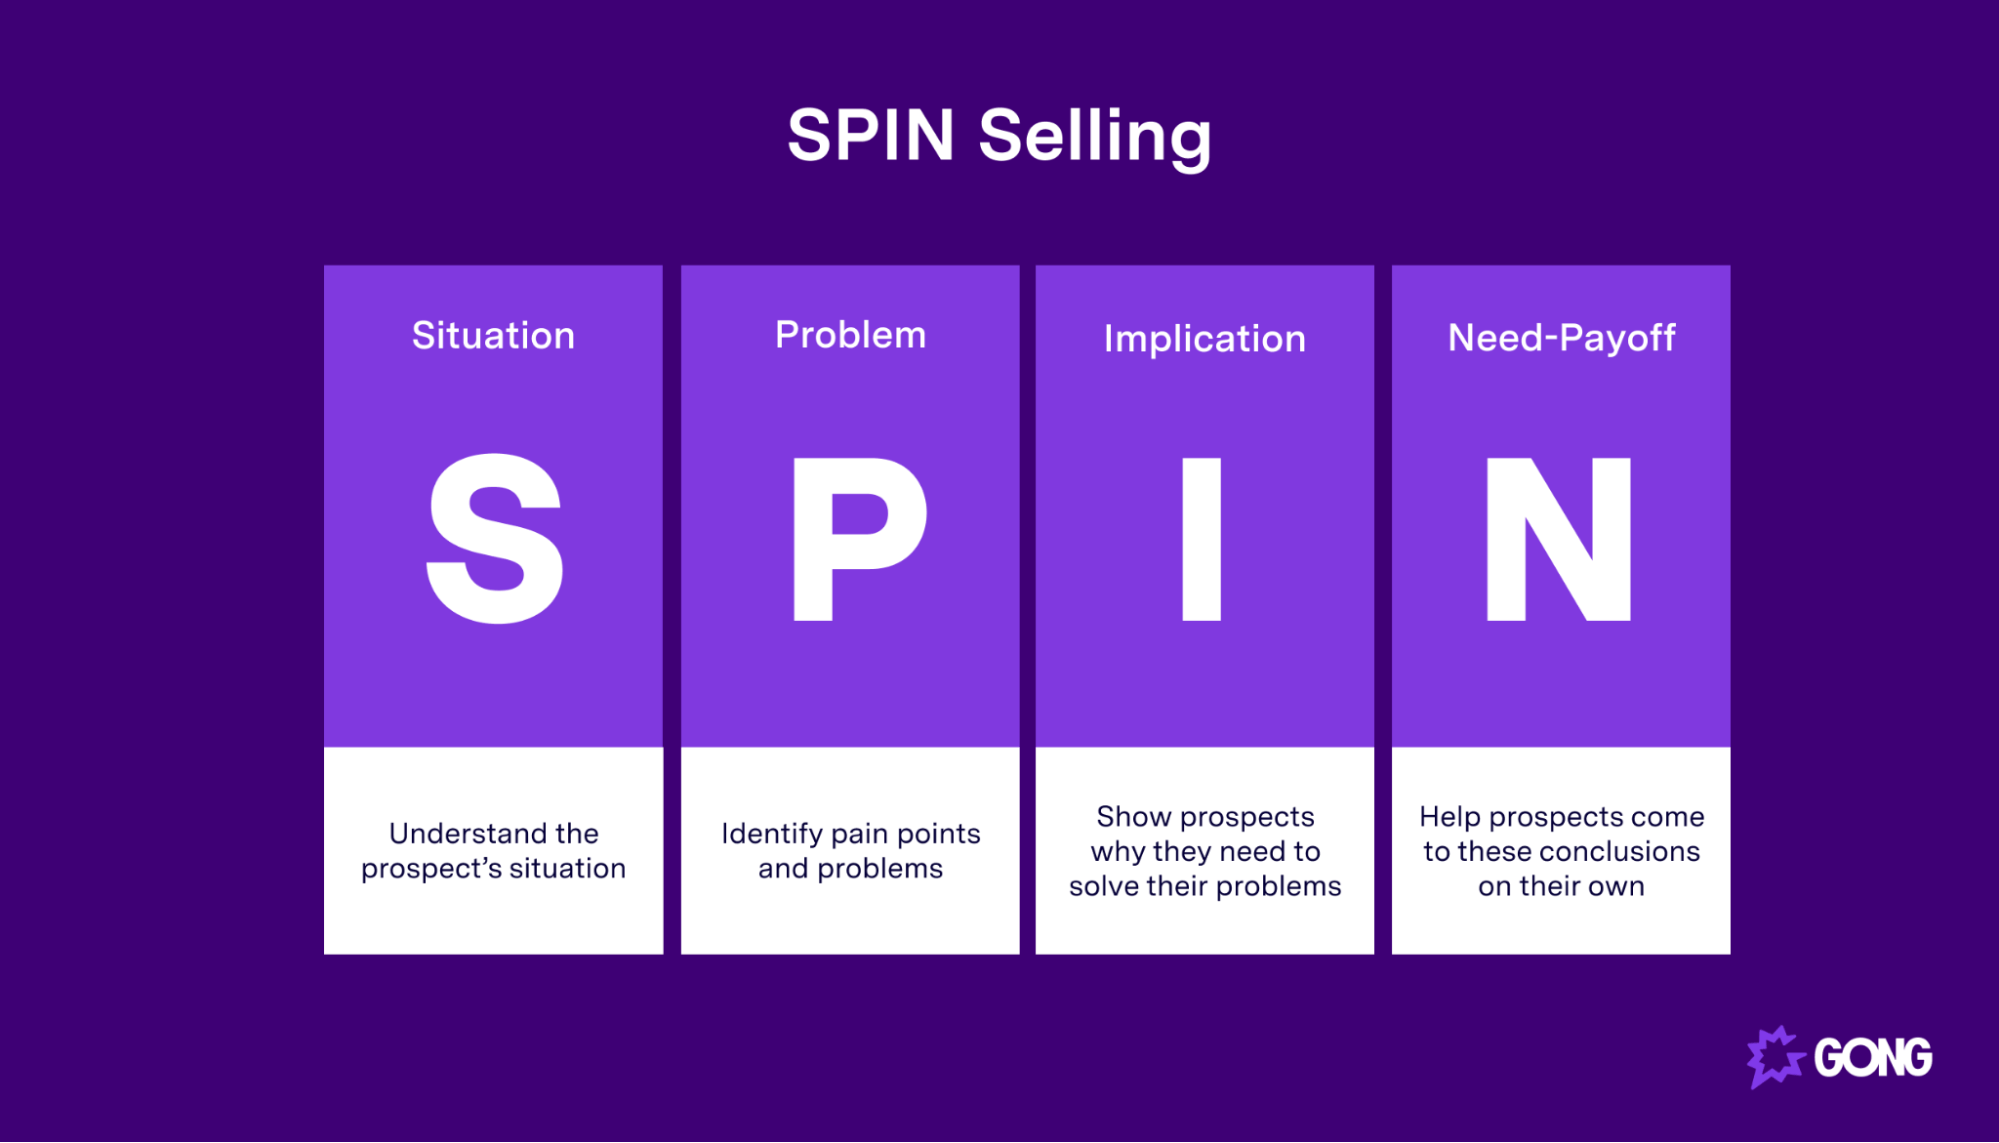 SPIN Selling methodology overview